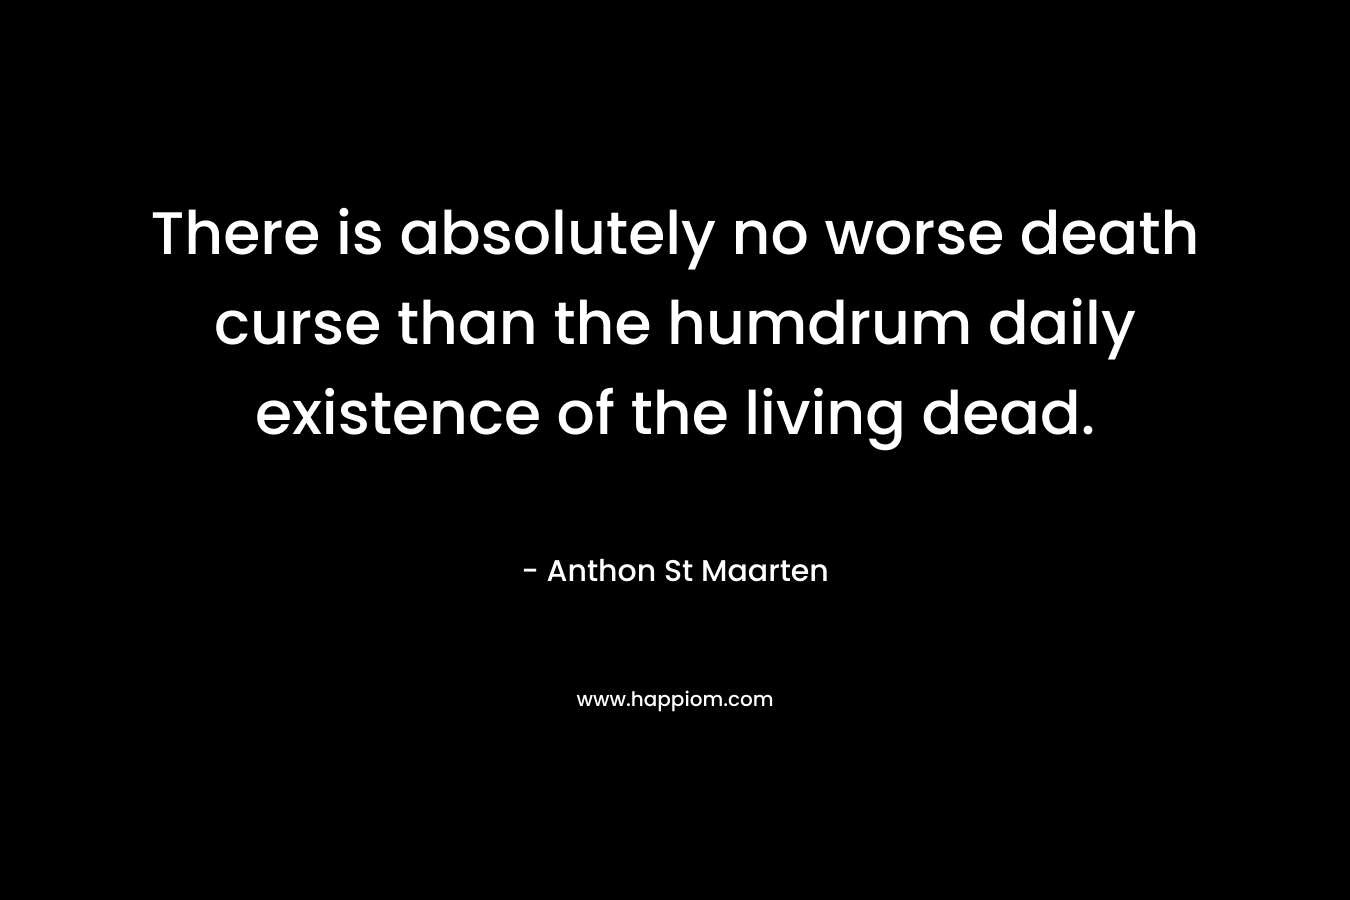 There is absolutely no worse death curse than the humdrum daily existence of the living dead. – Anthon St Maarten